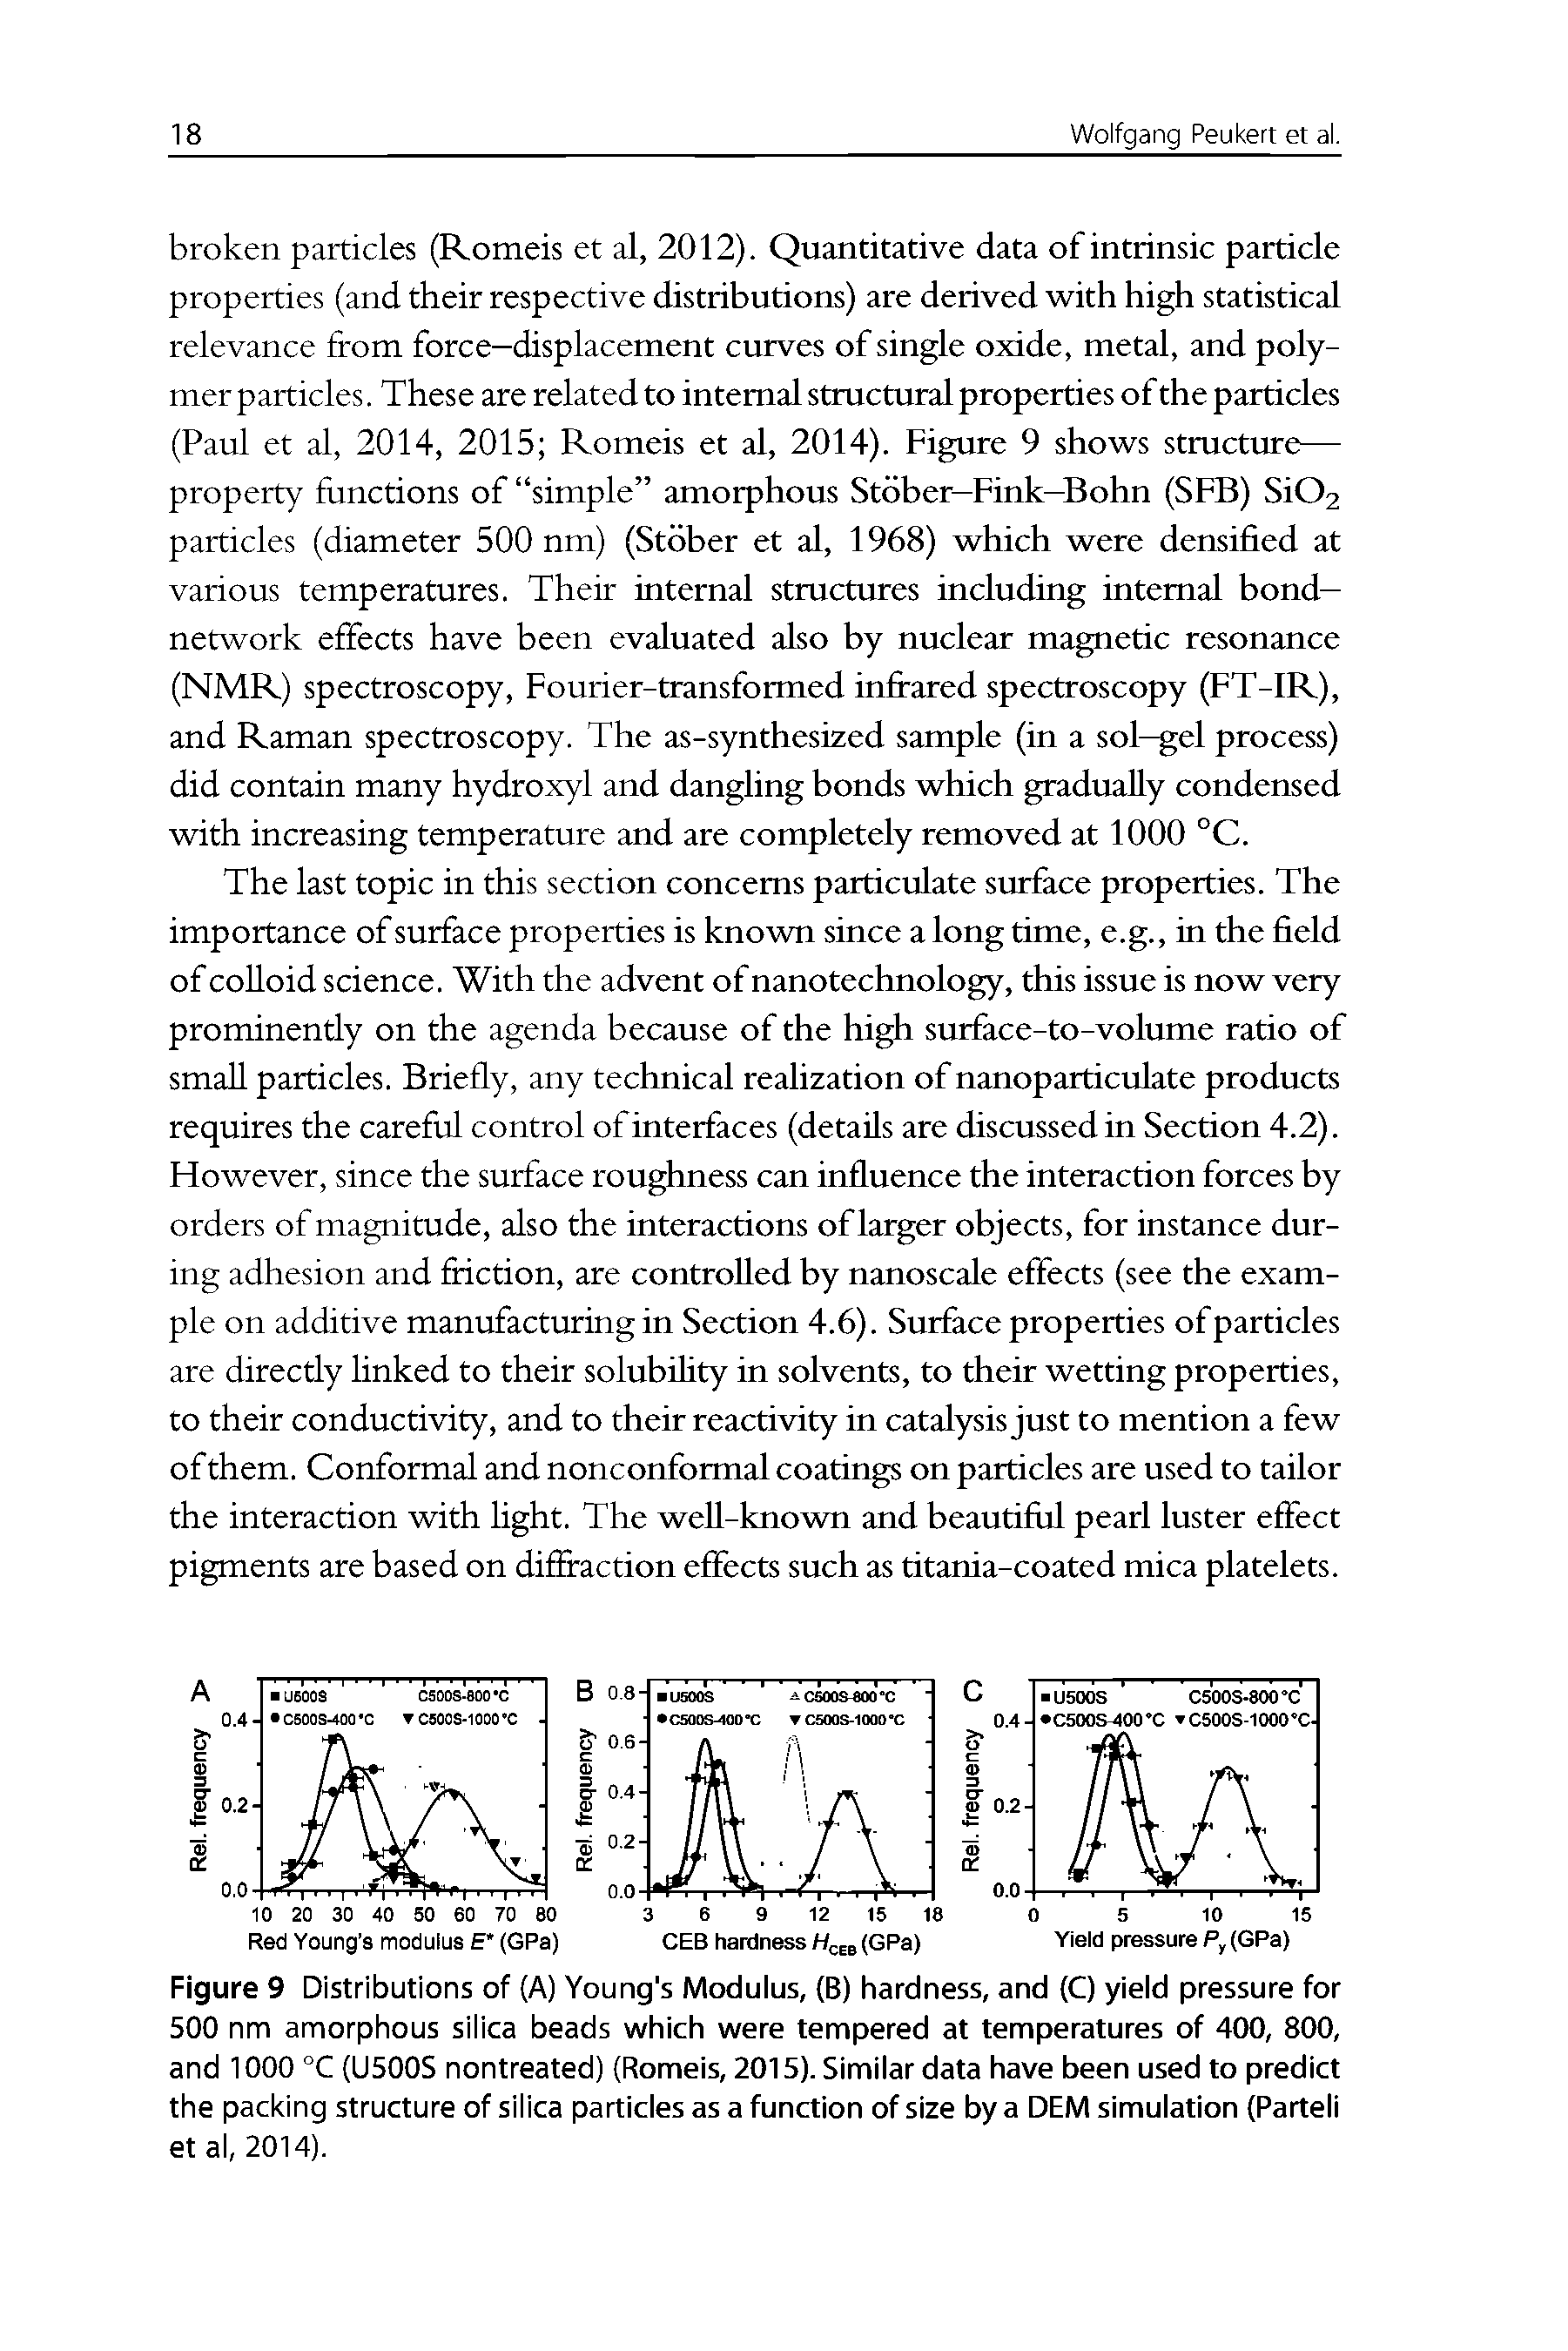 Figure 9 Distributions of (A) Young s Modulus, (B) hardness, and (C) yield pressure for 500 nm amorphous silica beads which were tempered at temperatures of 400, 800, and 1000 °C (U500S nontreated) (Romeis, 2015). Similar data have been used to predict the packing structure of silica particles as a function of size by a DEM simulation (Parteli etal, 2014).